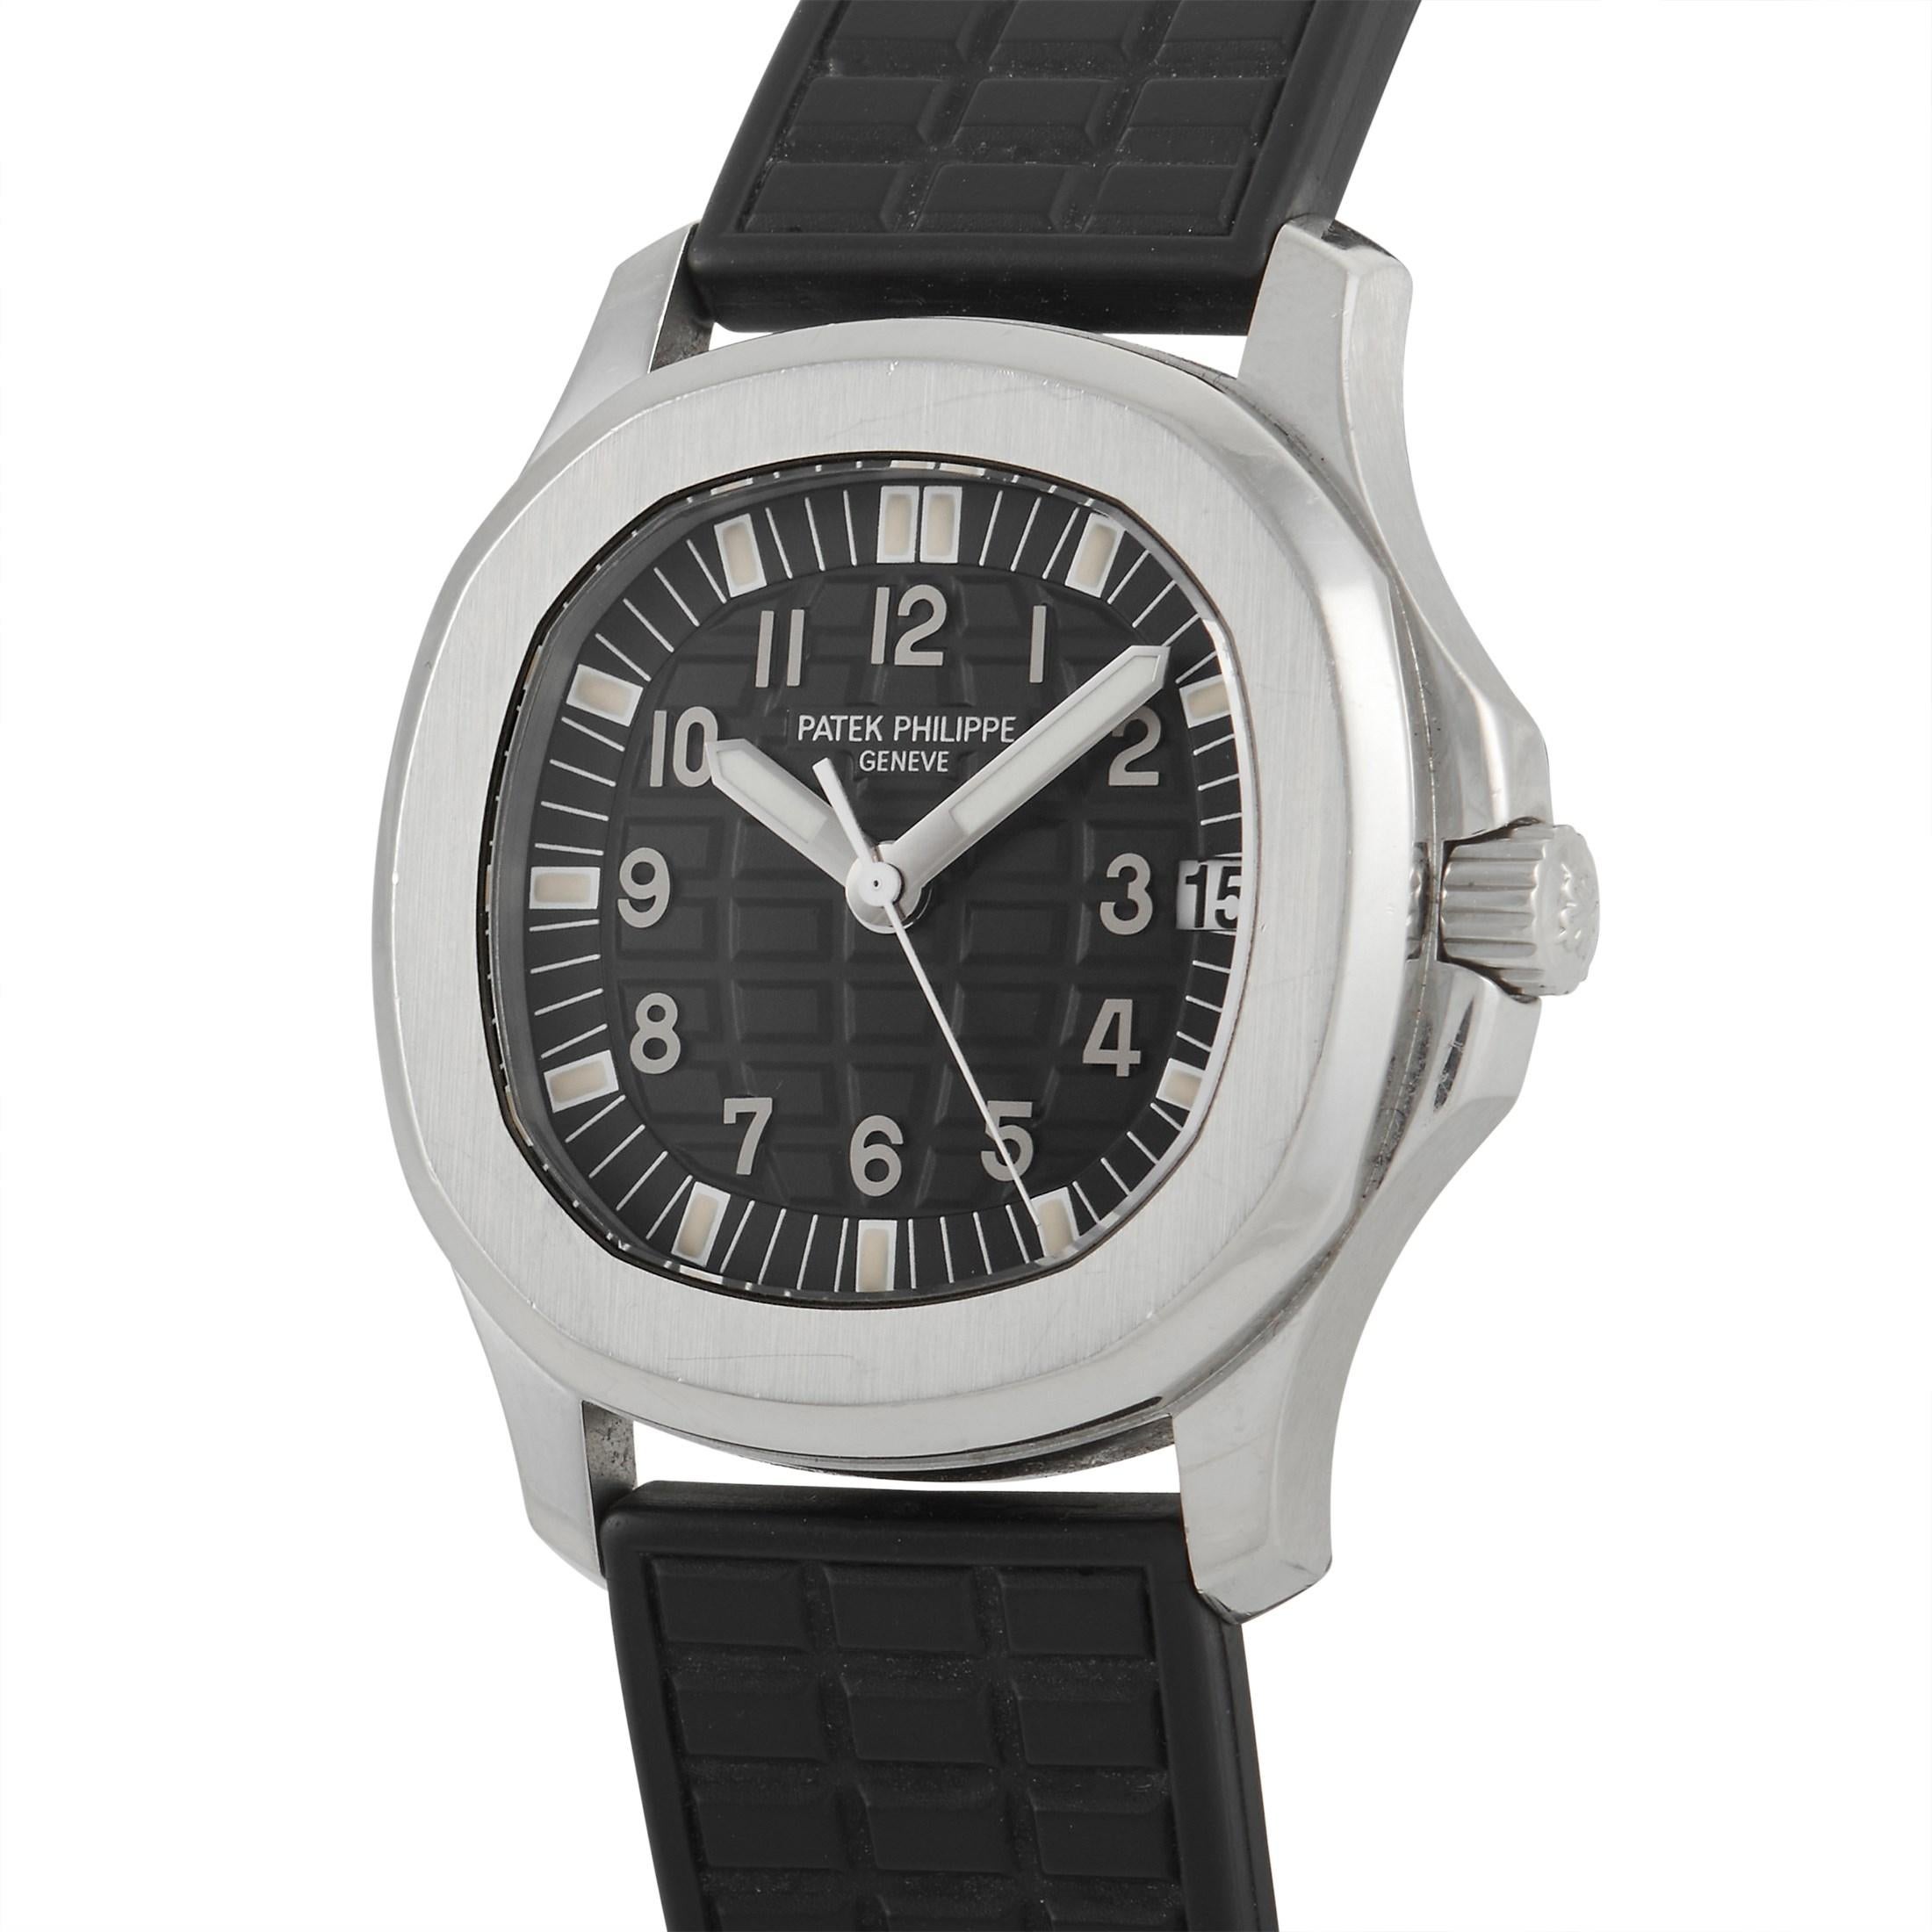 The Patek Philippe Aquanaut Watch, reference number 5066A, possesses an understated sense of style.

On this timeless accessory, you’ll find a durable black rubber strap as well as a 36mm cushion-shaped stainless steel case. The textured black dial